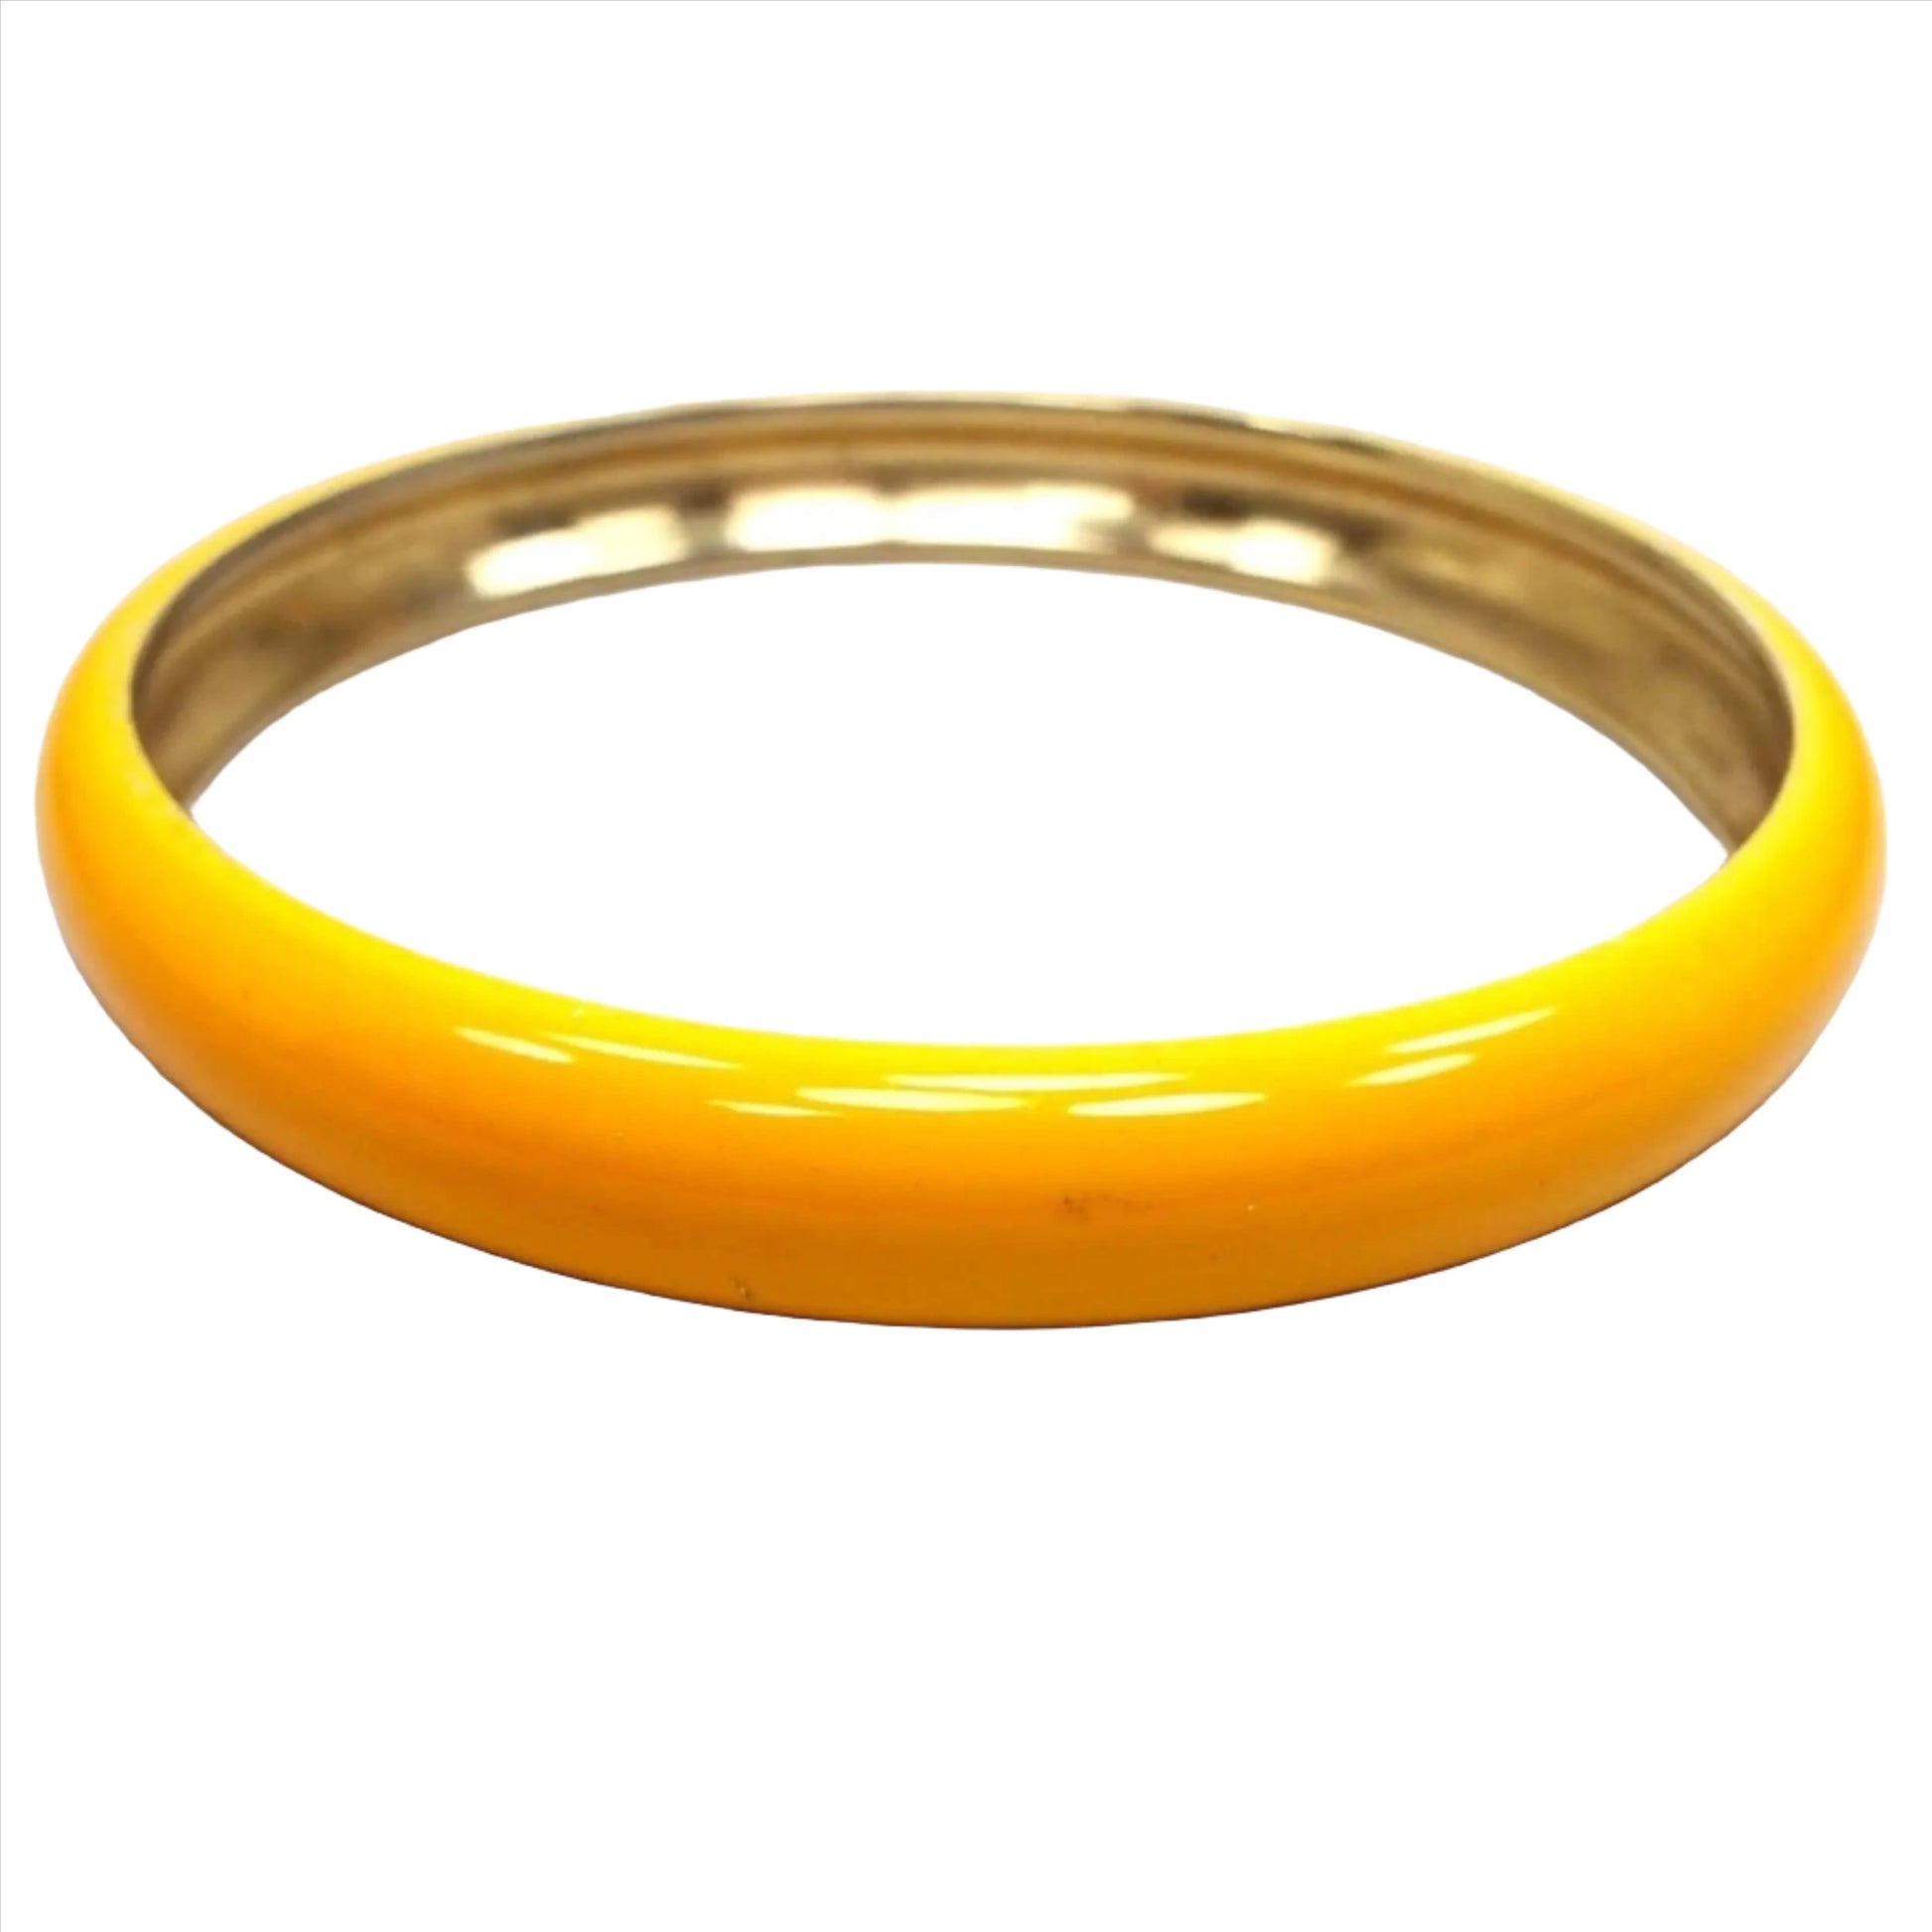 Angled top and side view of the retro vintage bangle bracelet. The outer edge is curved and enameled with a dark yellow color that has some shades of orange as you get to the middle. The inside of the bangle is gold tone metal color.